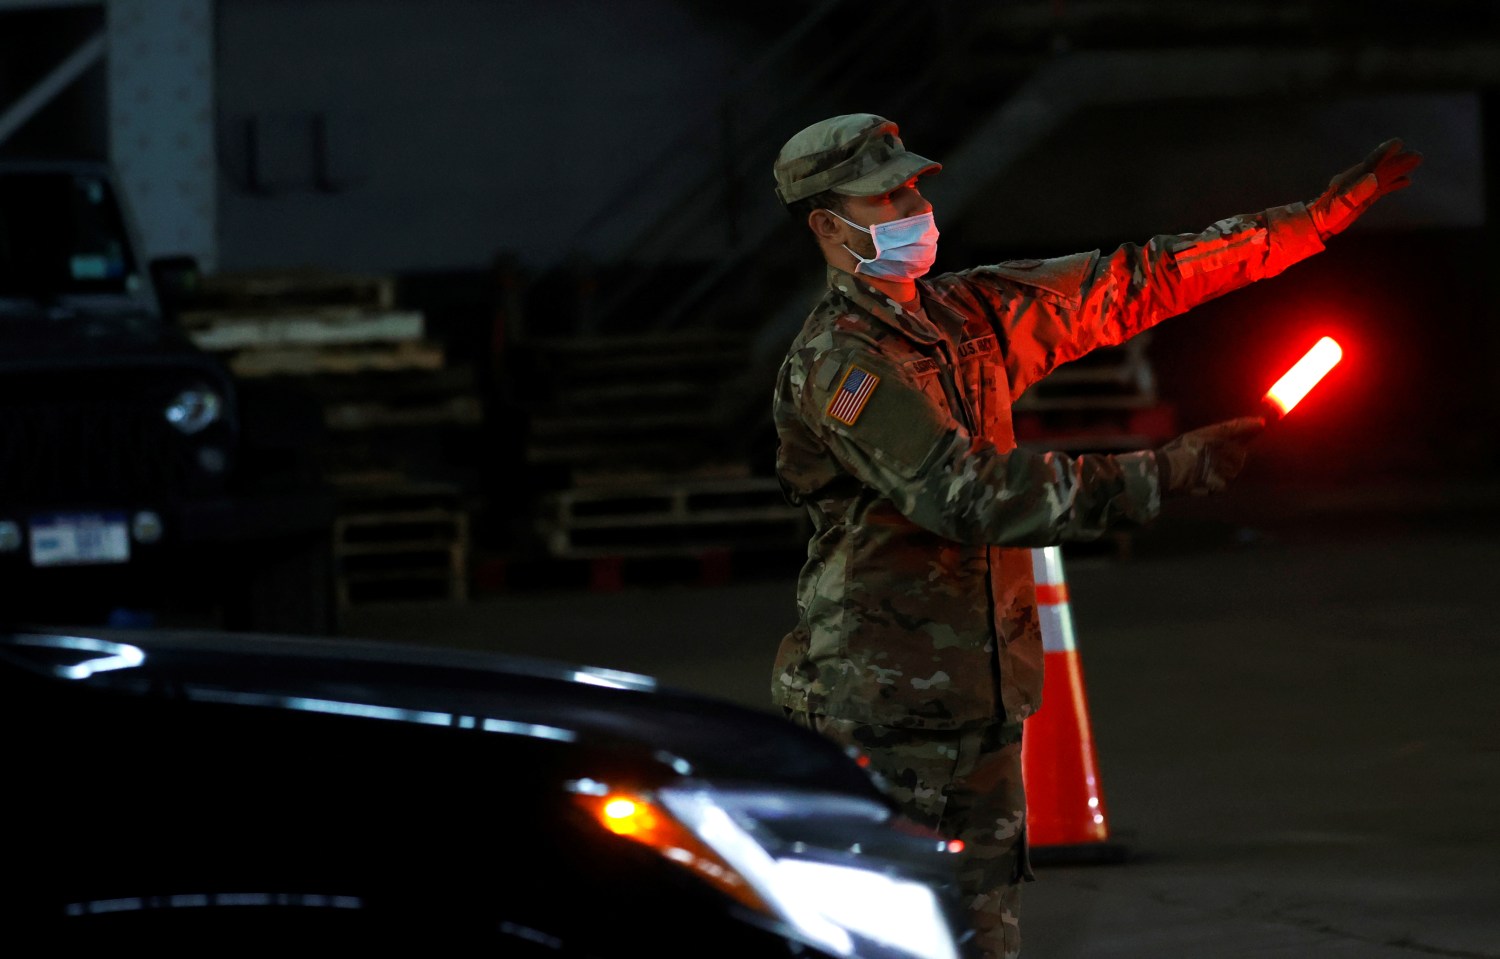 A U.S. Army National Guard soldier wears a protective face mask while directing vehicles to pick up food for delivery to residents in need, at the Kingsbridge Armory which is being used as a temporary food distribution center during the outbreak of the coronavirus disease (COVID-19) in the Bronx borough of New York City, New York, U.S., April 21, 2020. REUTERS/Mike Segar